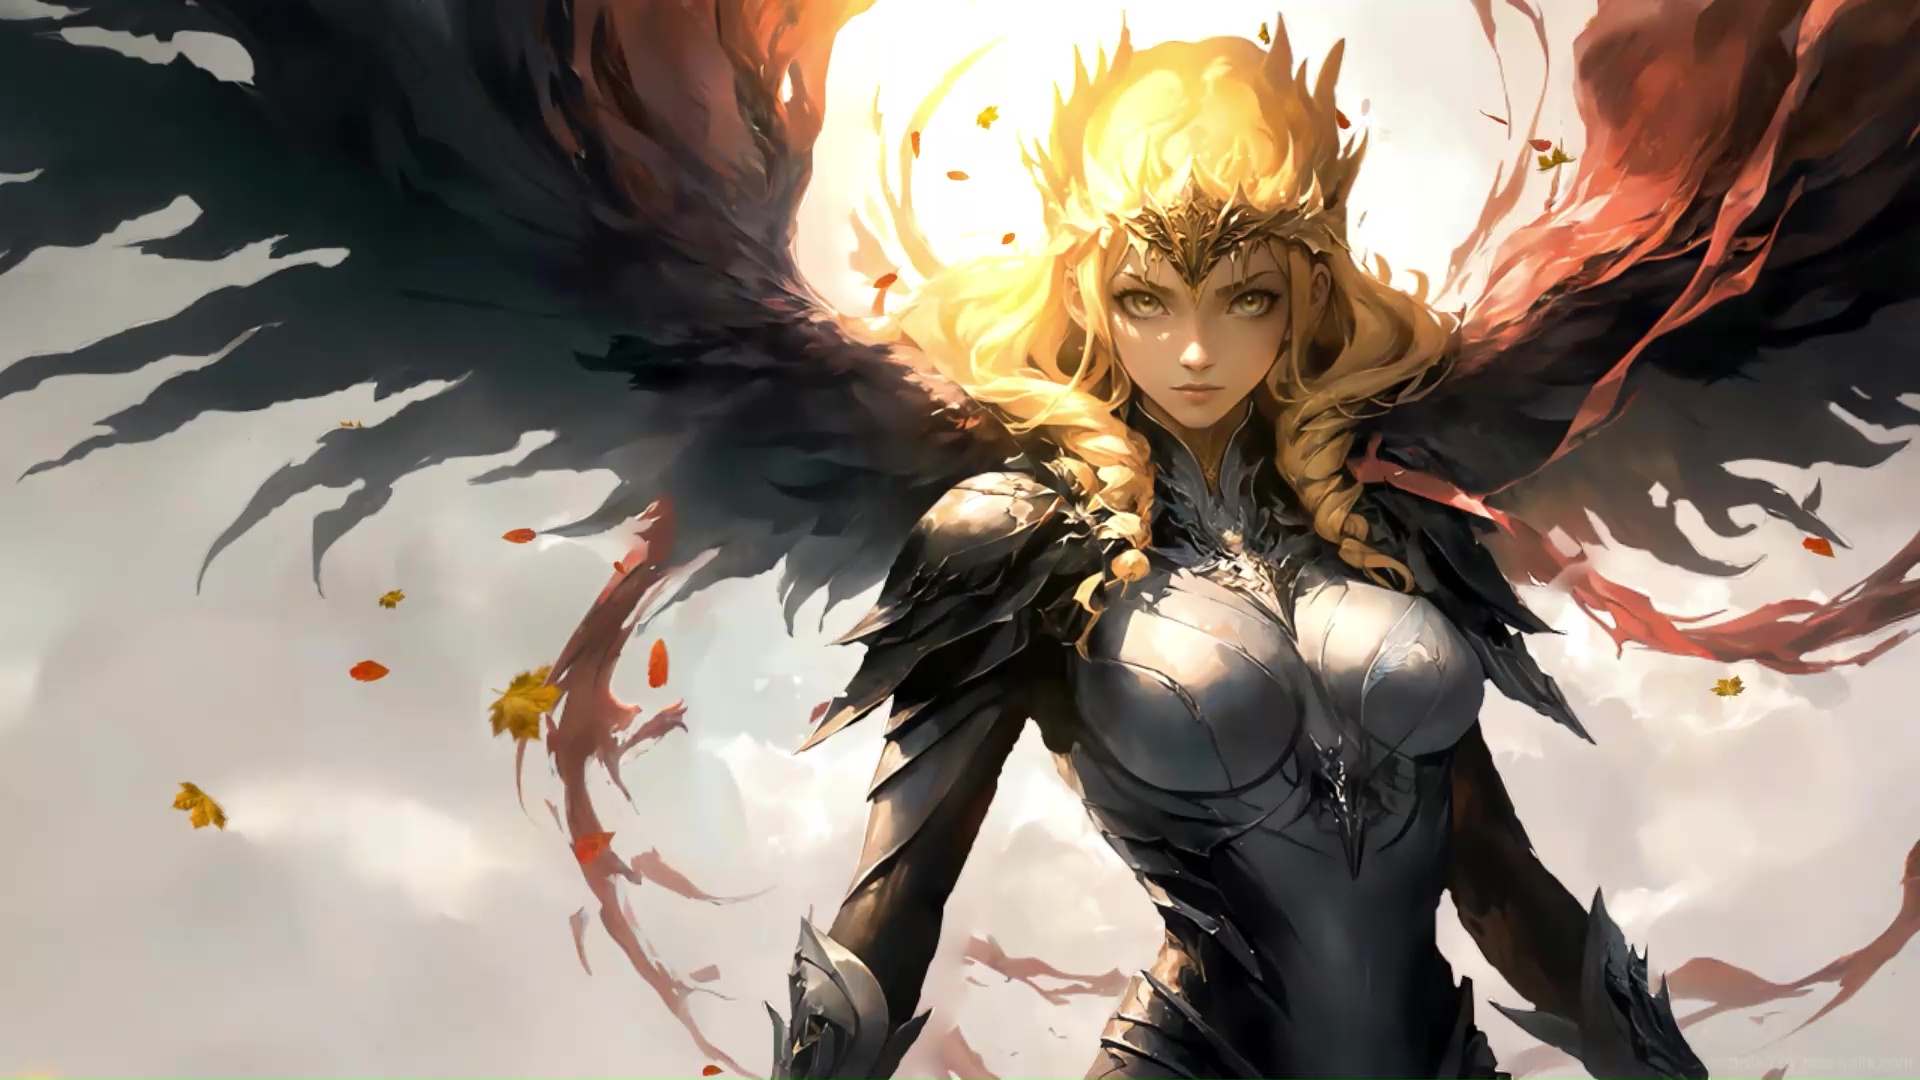 10 Best Wallpapers Hd Anime 1920X1080 FULL HD 1080p For PC